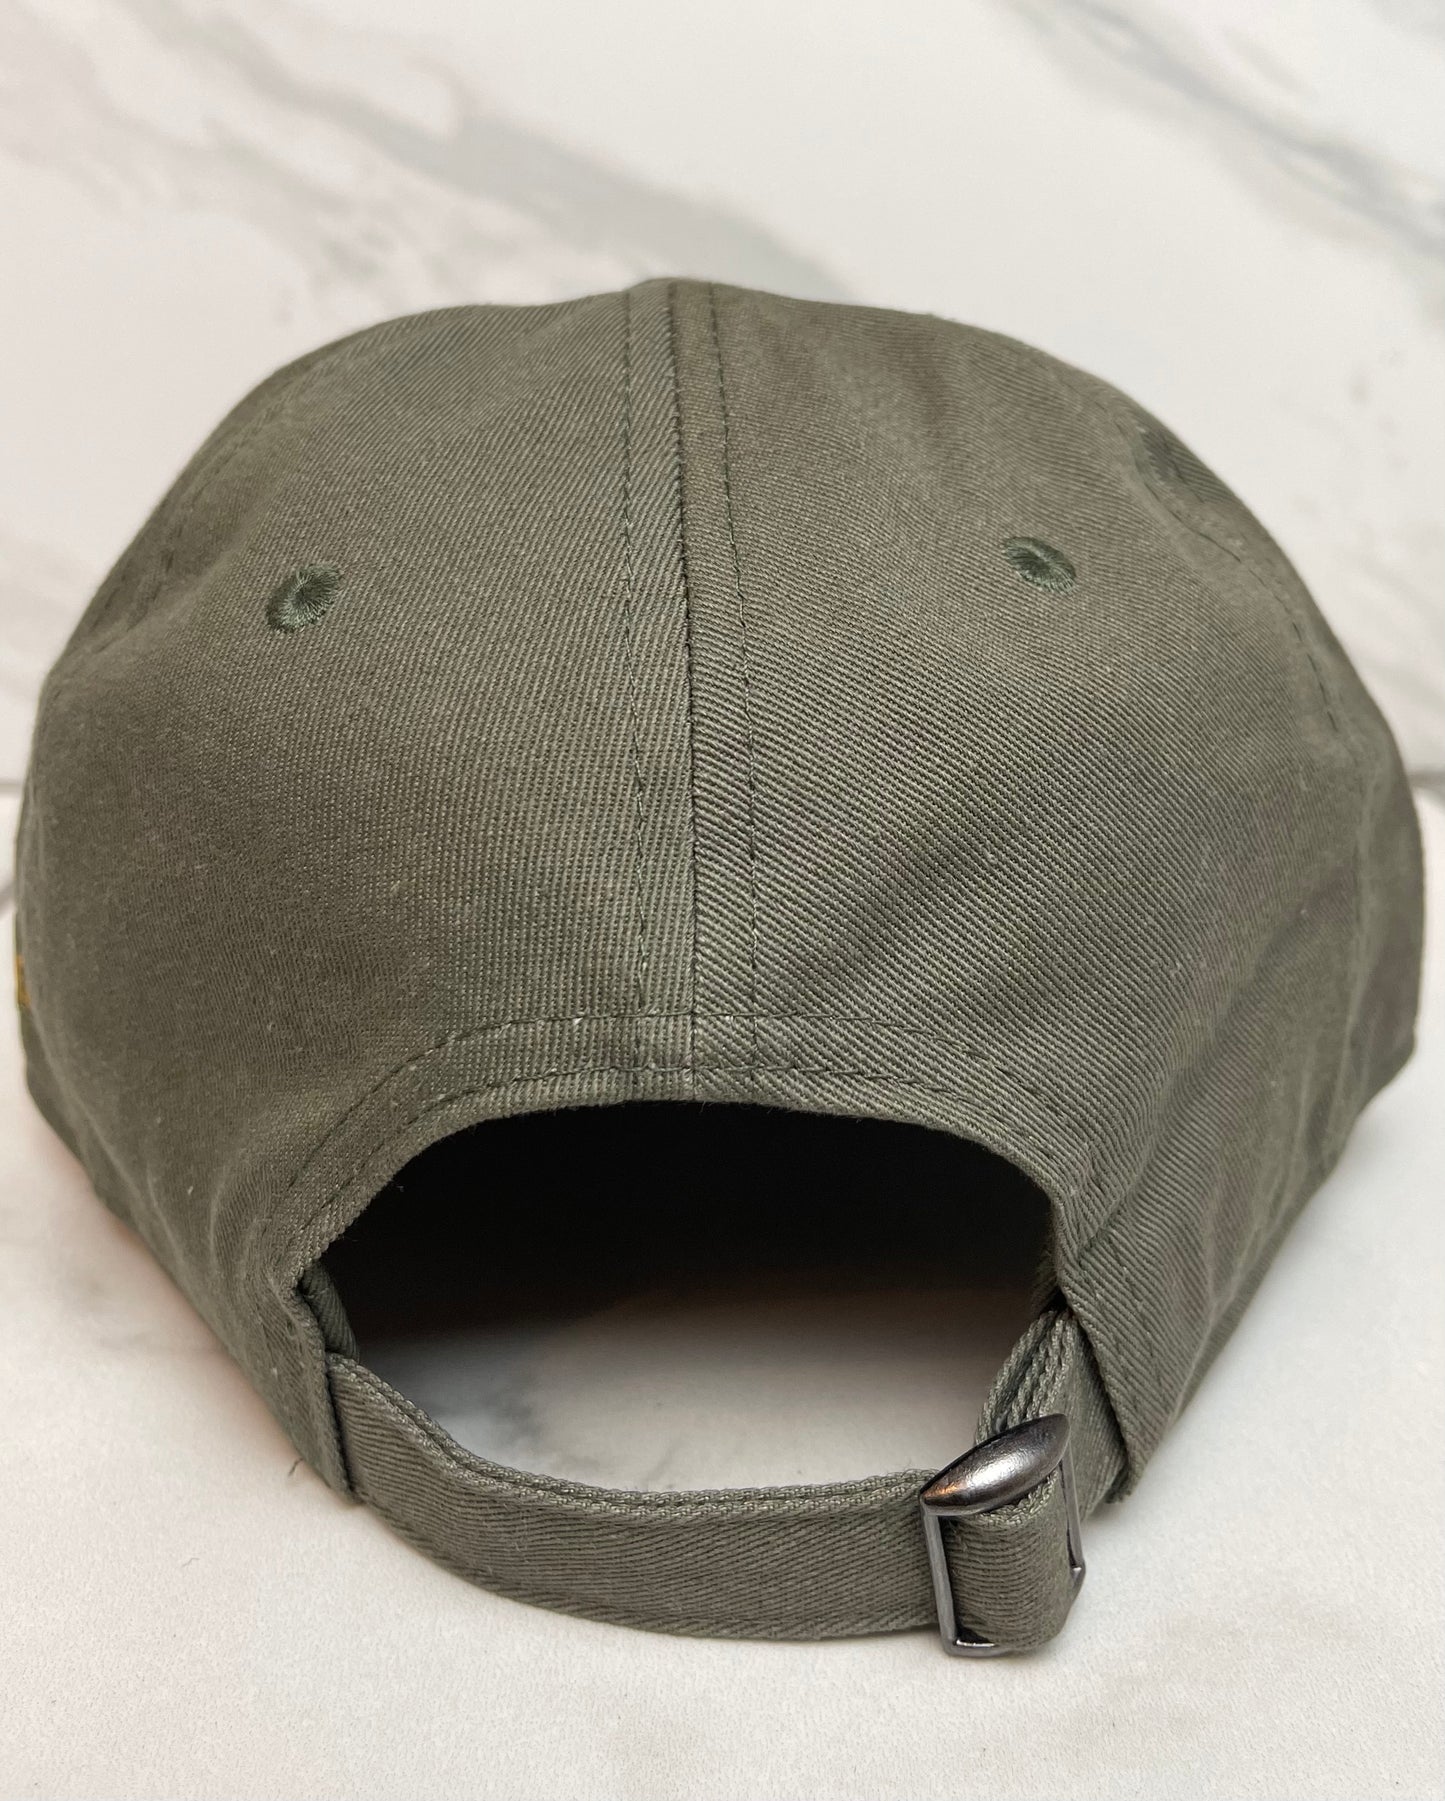 SEVEN CITIES DAD HAT-OLIVE